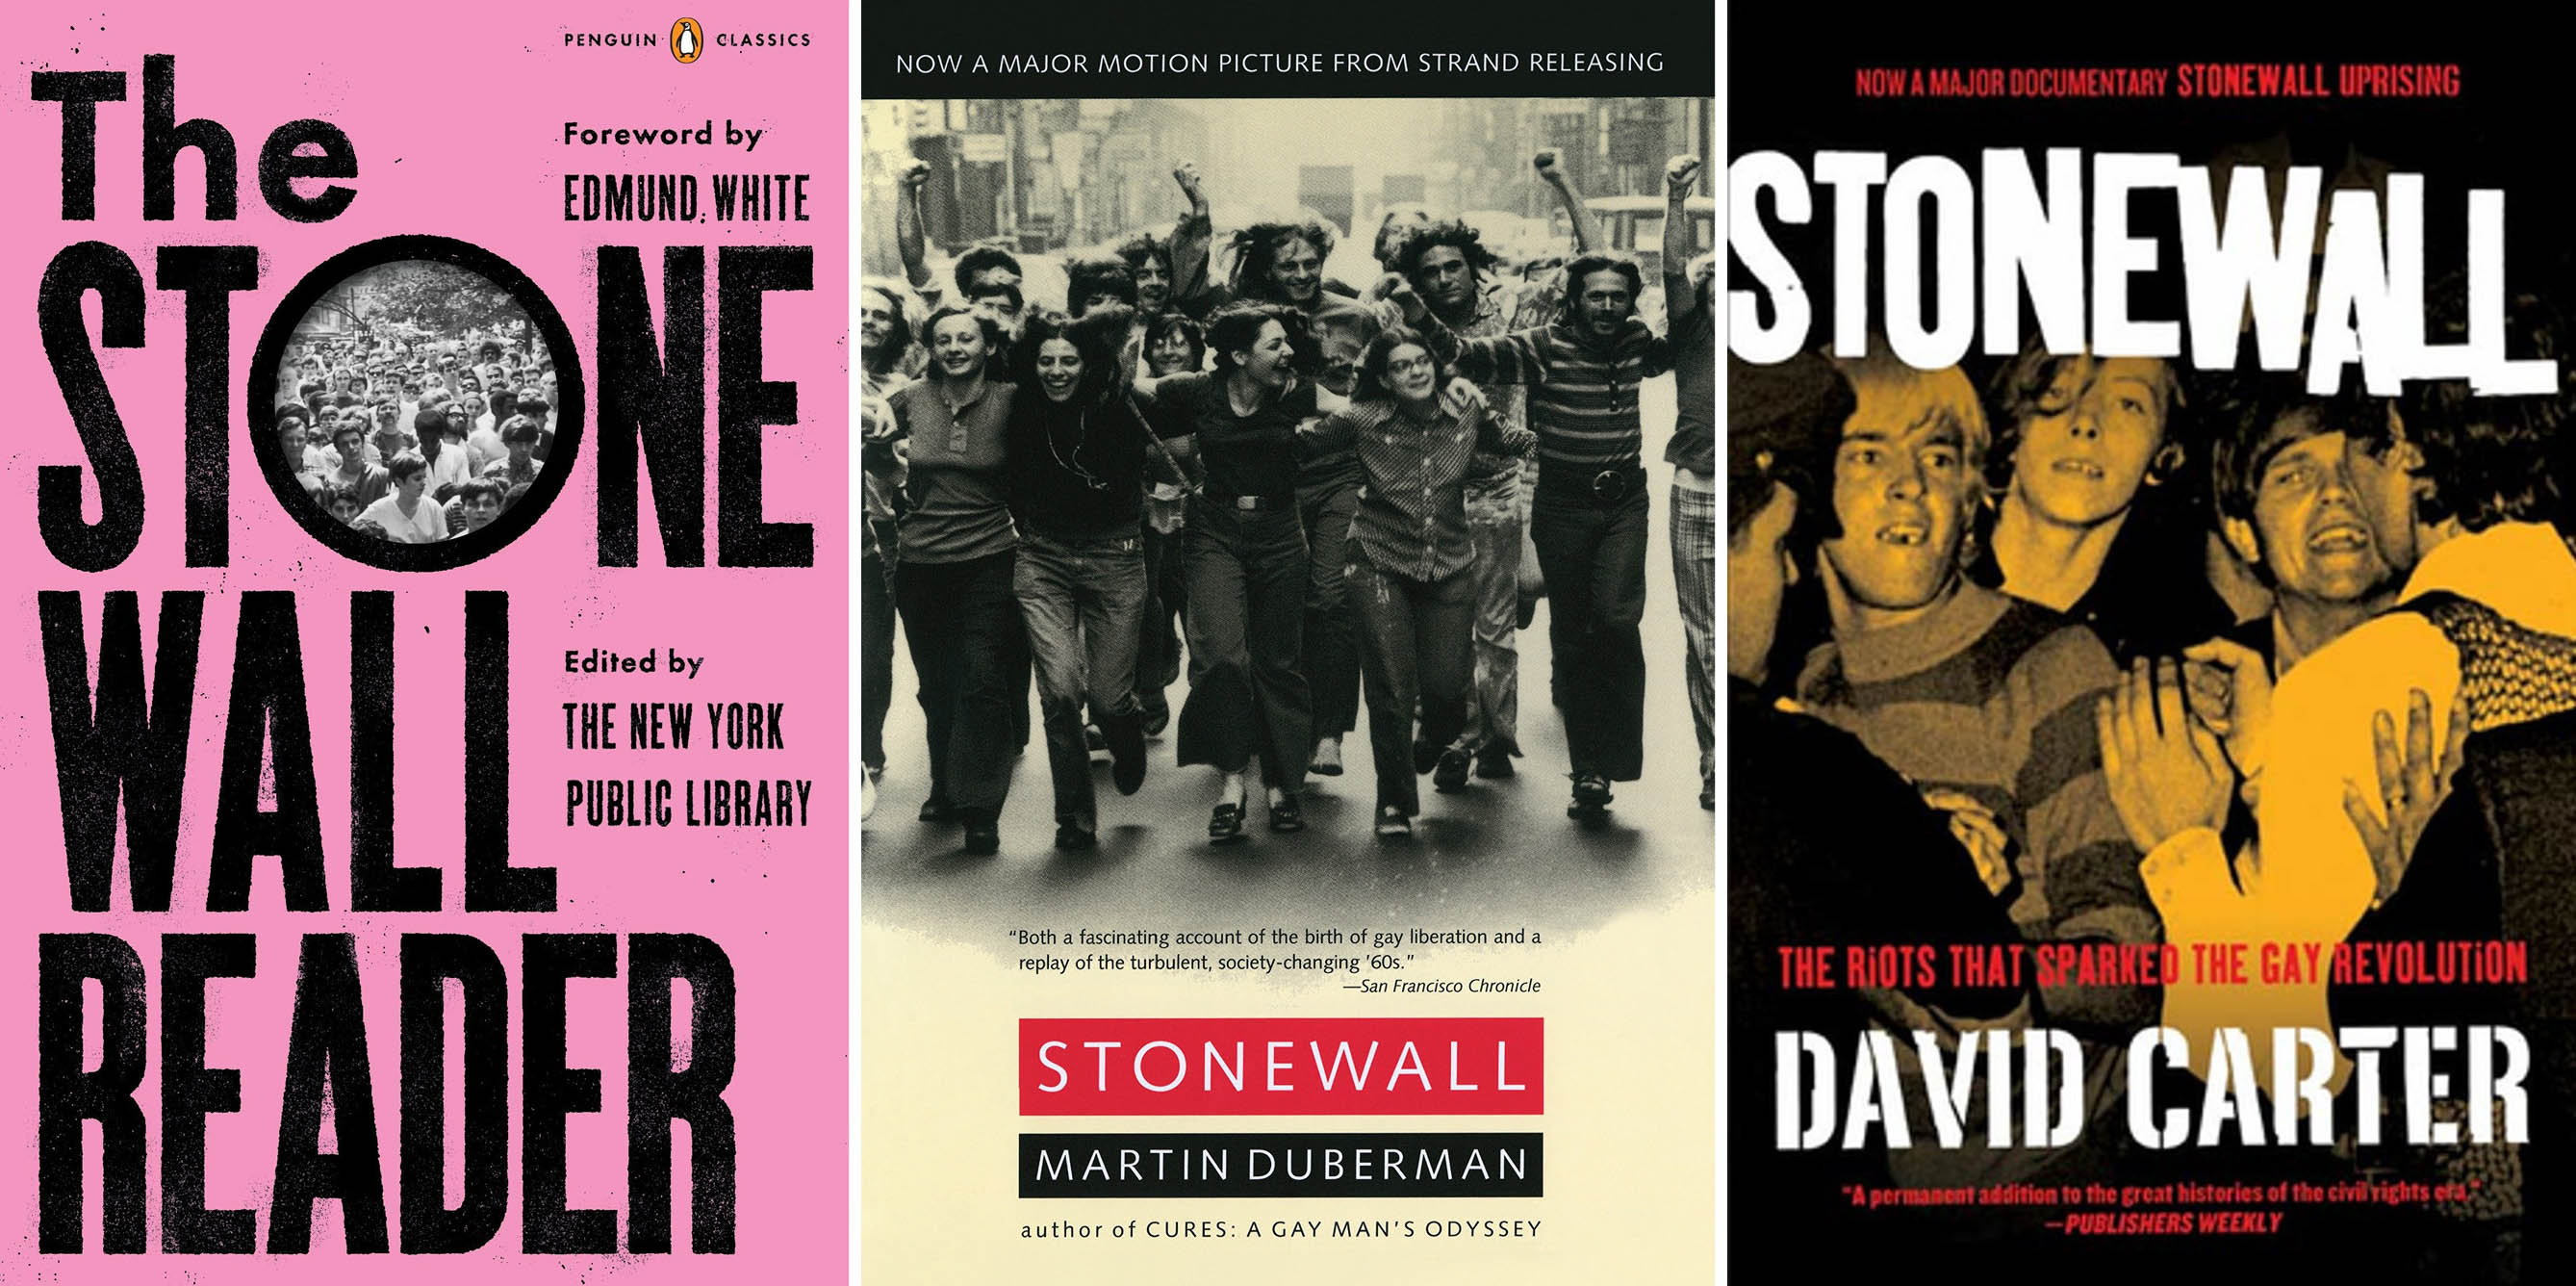 David carter stonewall the riots that sparked the gay revolution Stonewall Riots Reading The Santa Barbara Independent